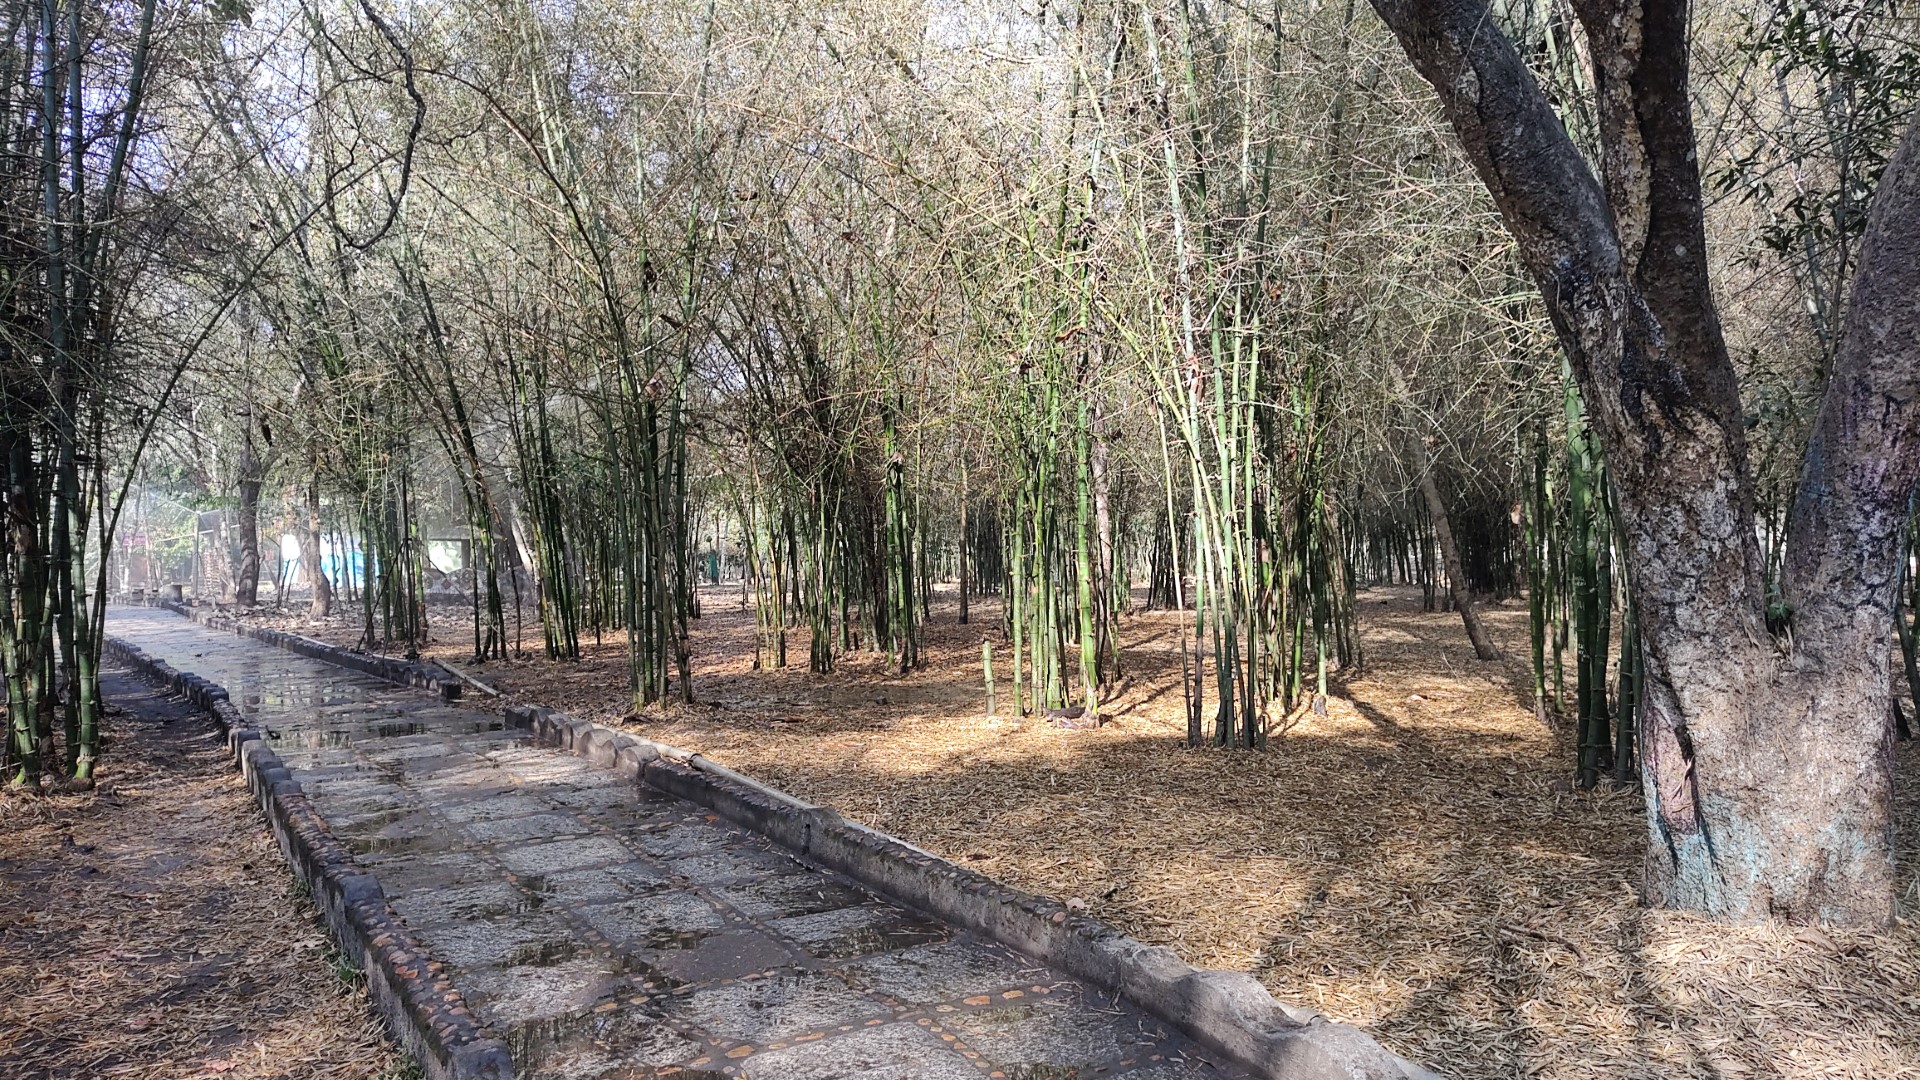 Bamboo forest at Nisargadhama in Summer 2022